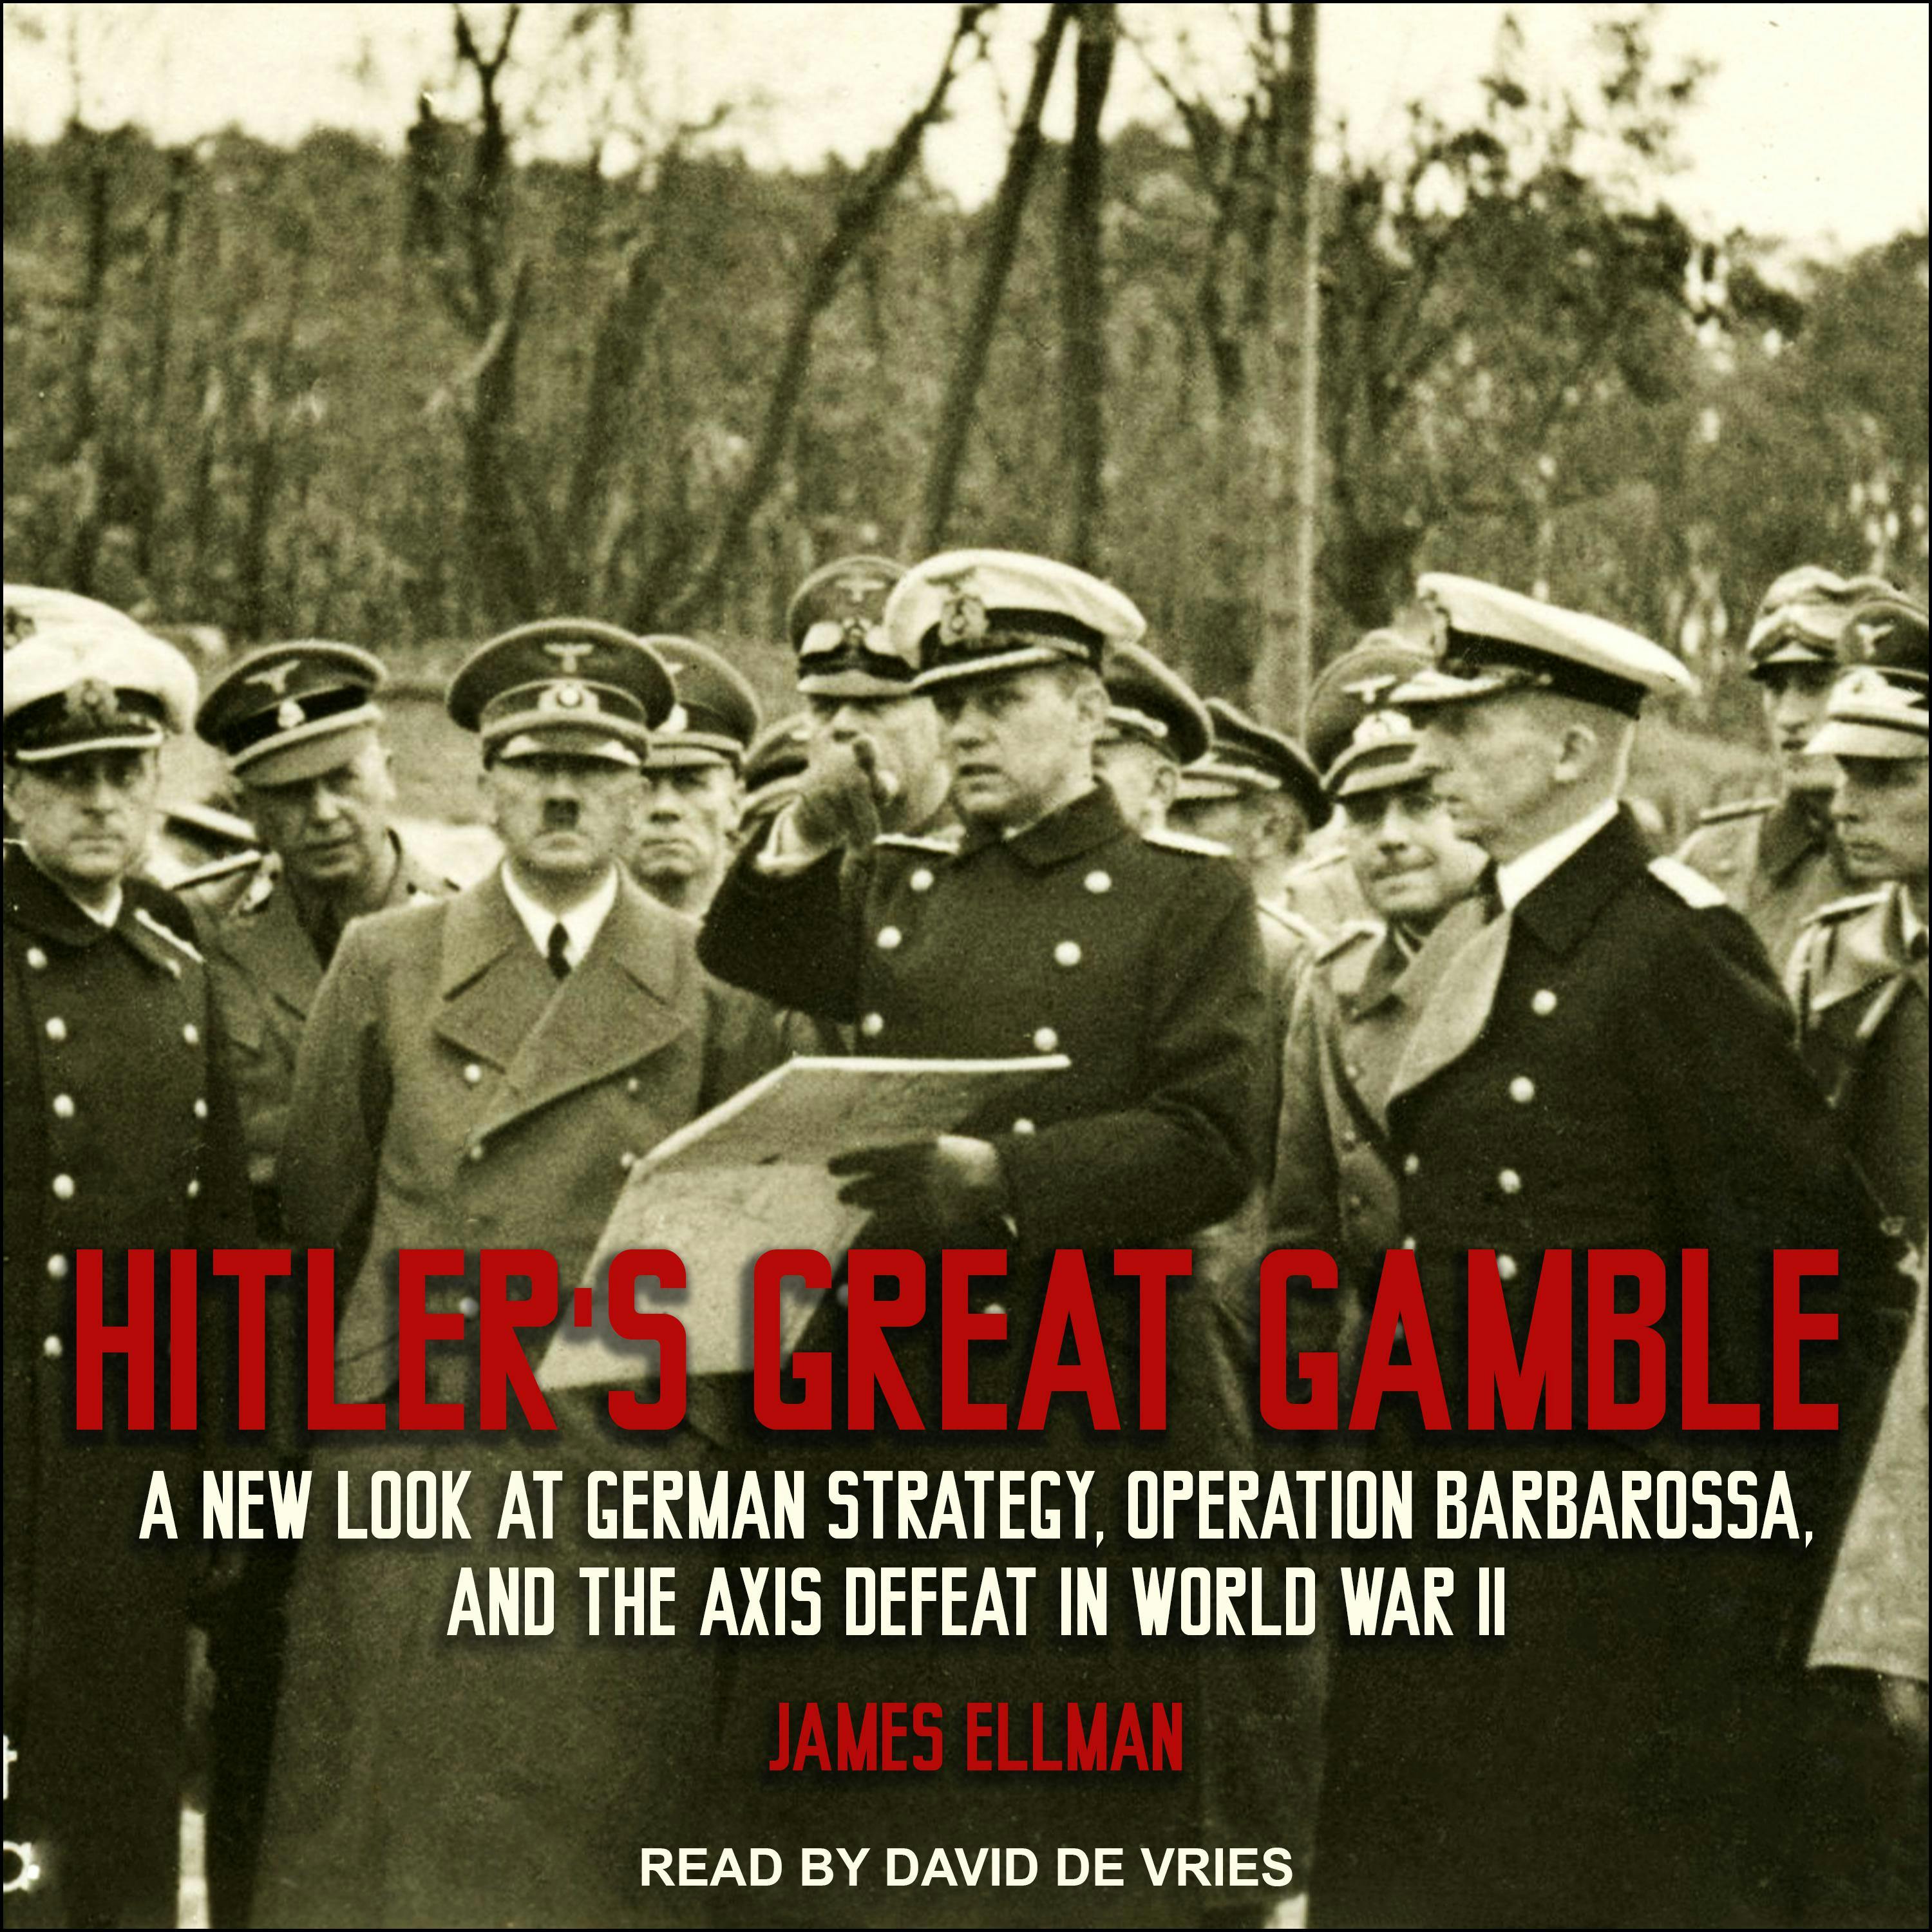 Hitler's Great Gamble: A New Look at German Strategy, Operation Barbarossa, and the Axis Defeat in World War II - James Ellman